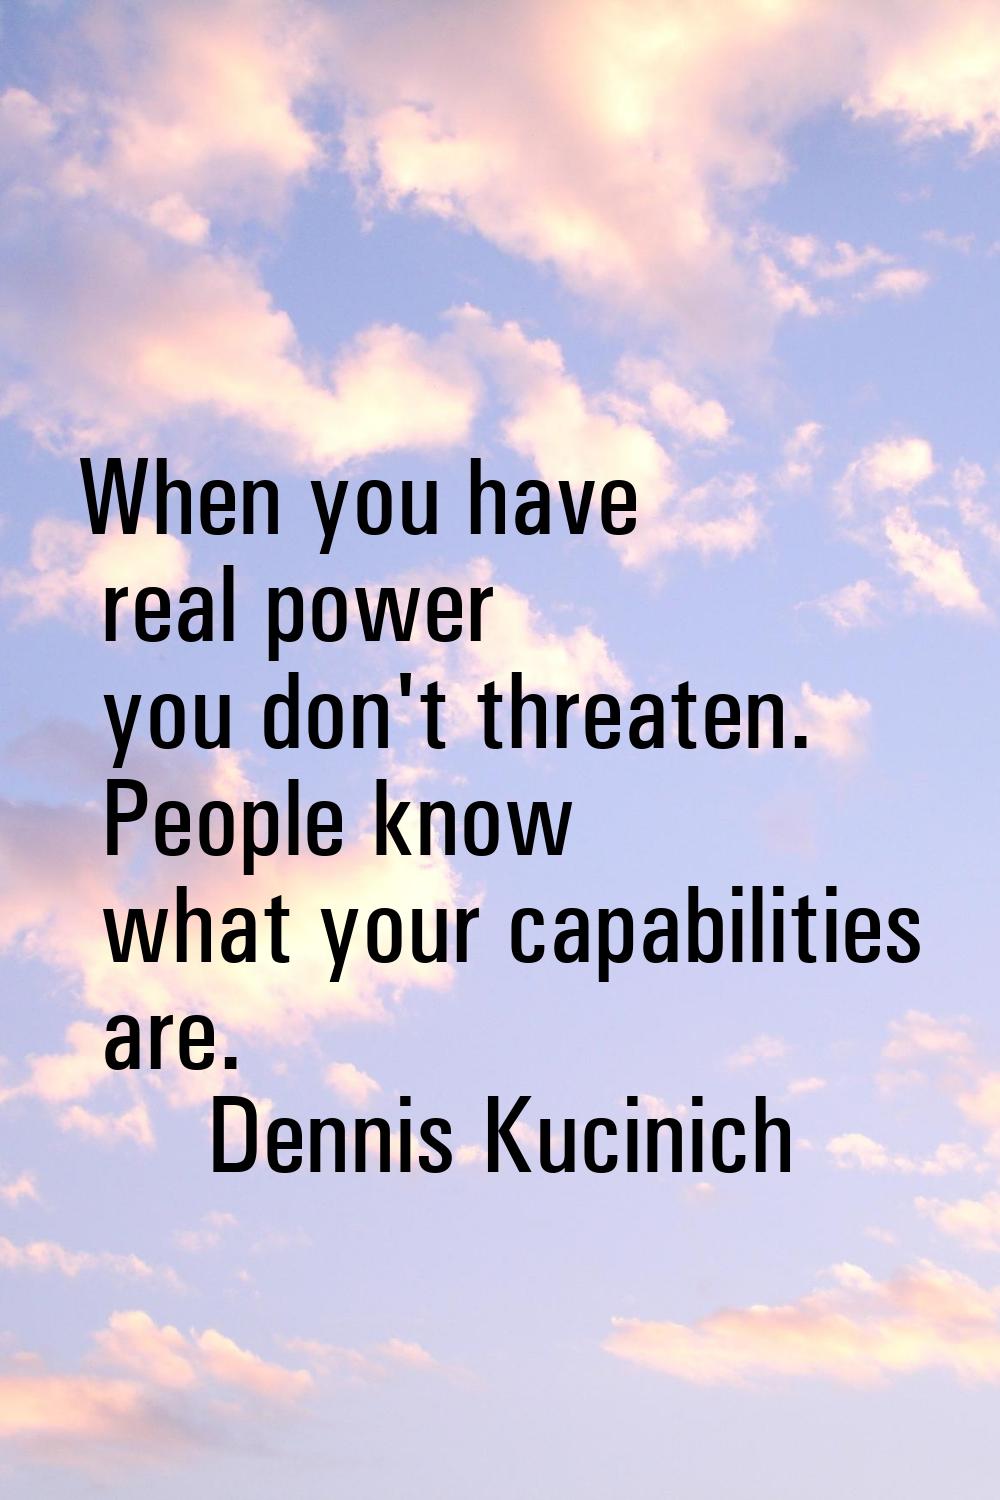 When you have real power you don't threaten. People know what your capabilities are.